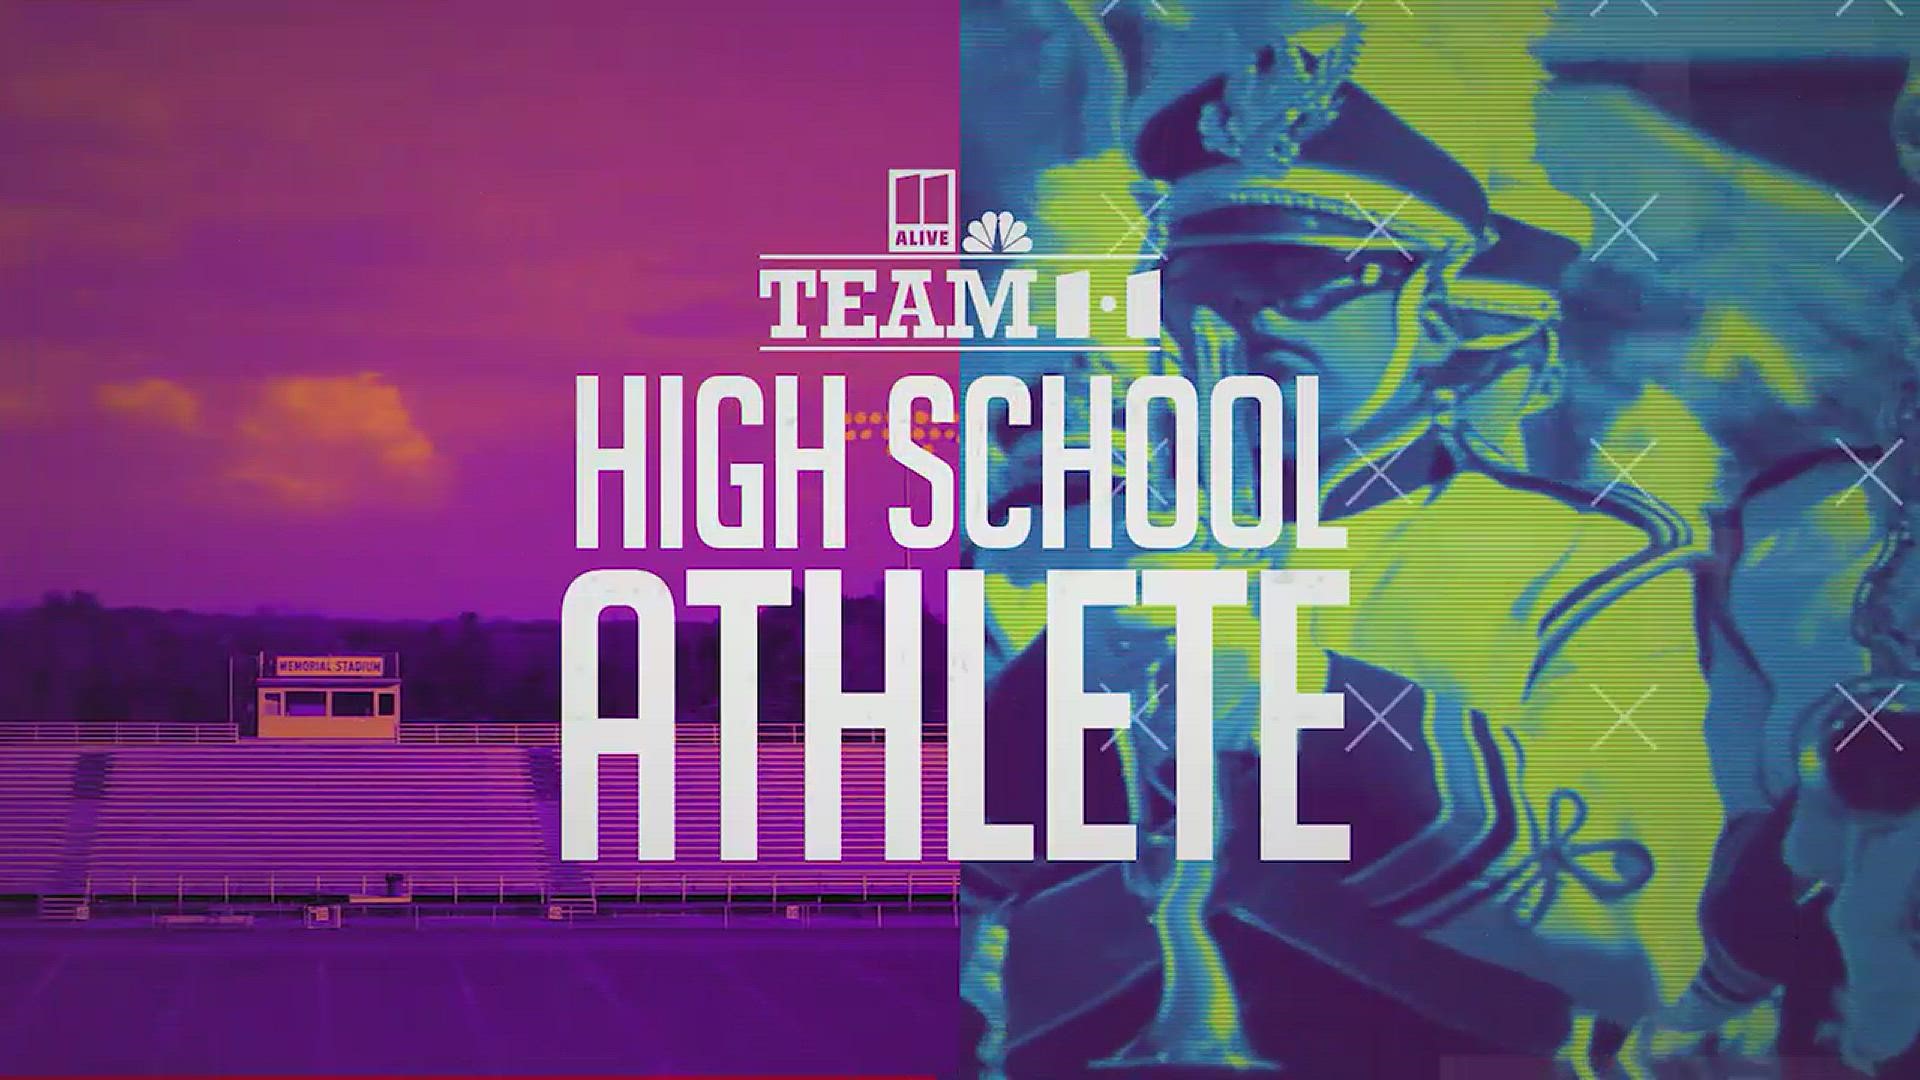 These are the nominees for outstanding high school athlete.